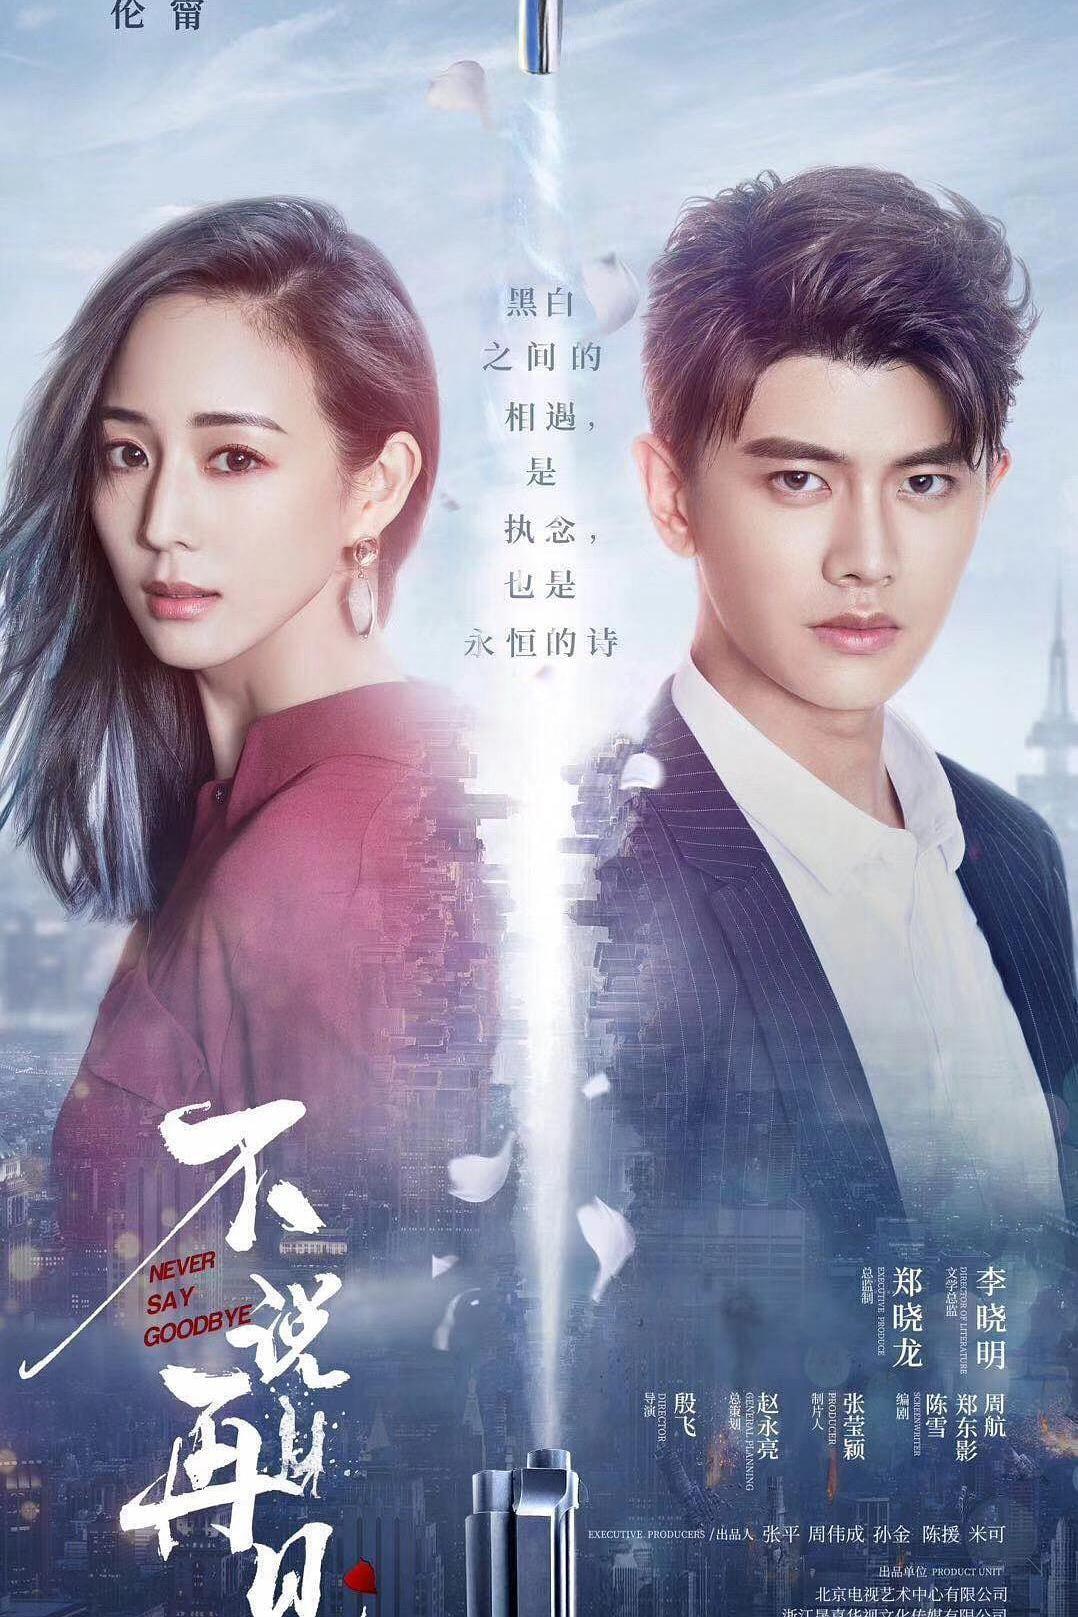 TV ratings for Never Say Goodbye (不说再见) in Ireland. iqiyi TV series